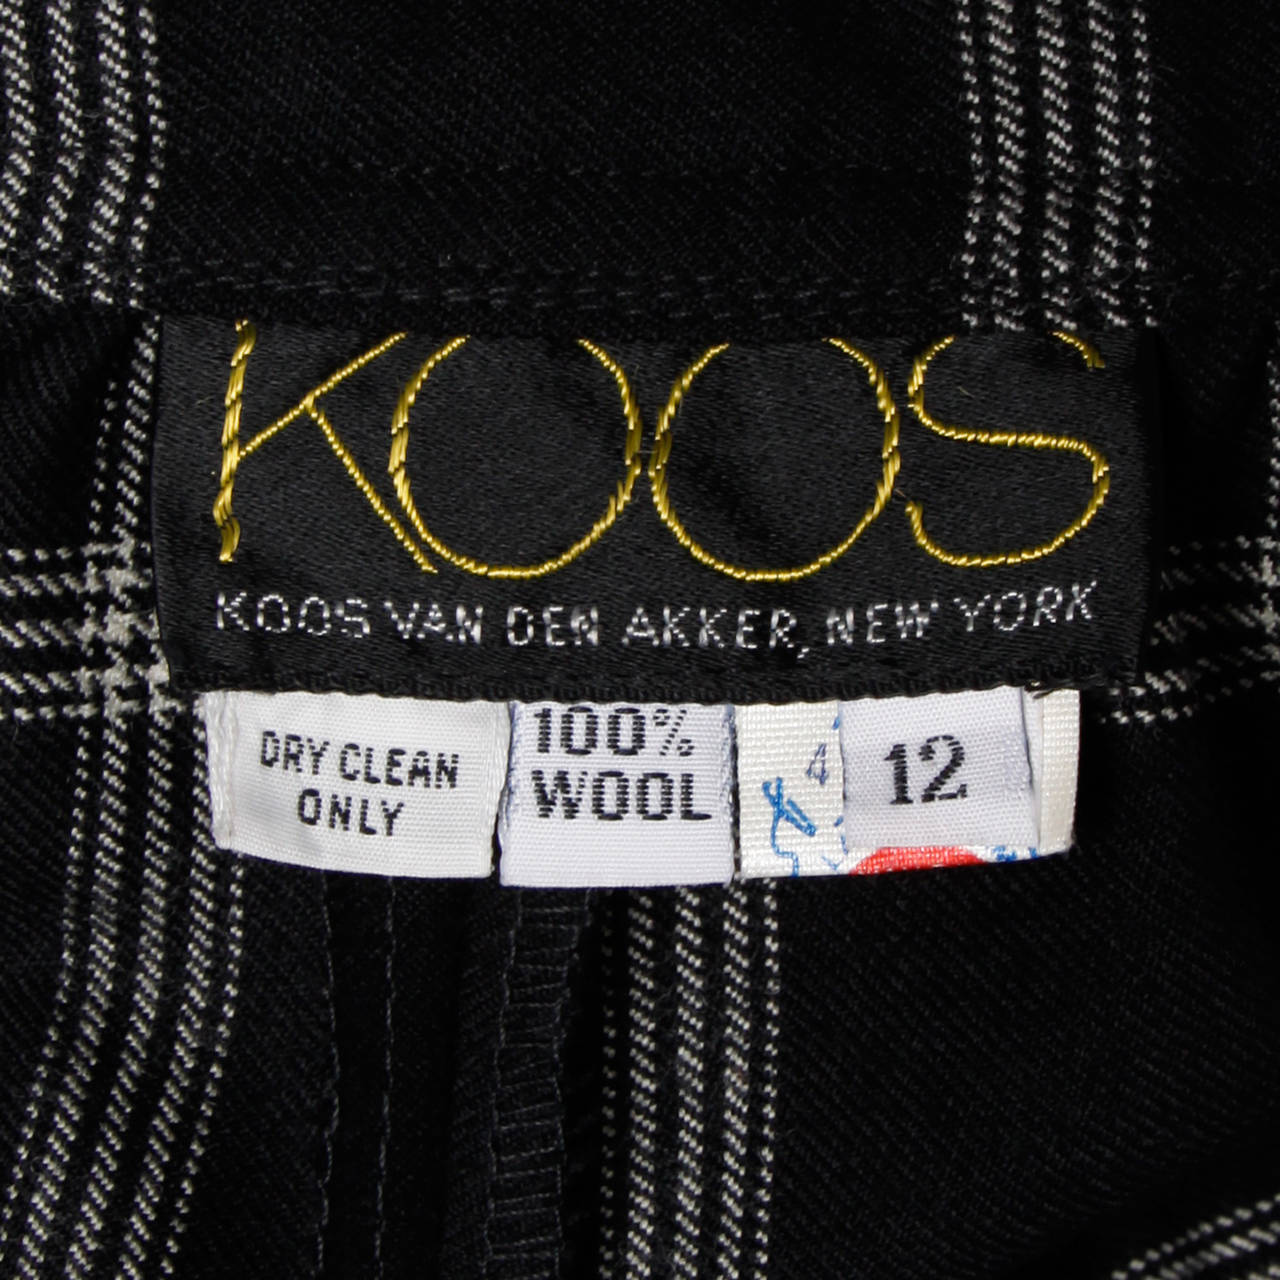 Vintage black and white wool skirt by Koos Van Der Akker. Beautiful quality wool. Unlined with rear zip and hook closure. Fits like a modern size medium. The waist measures 29